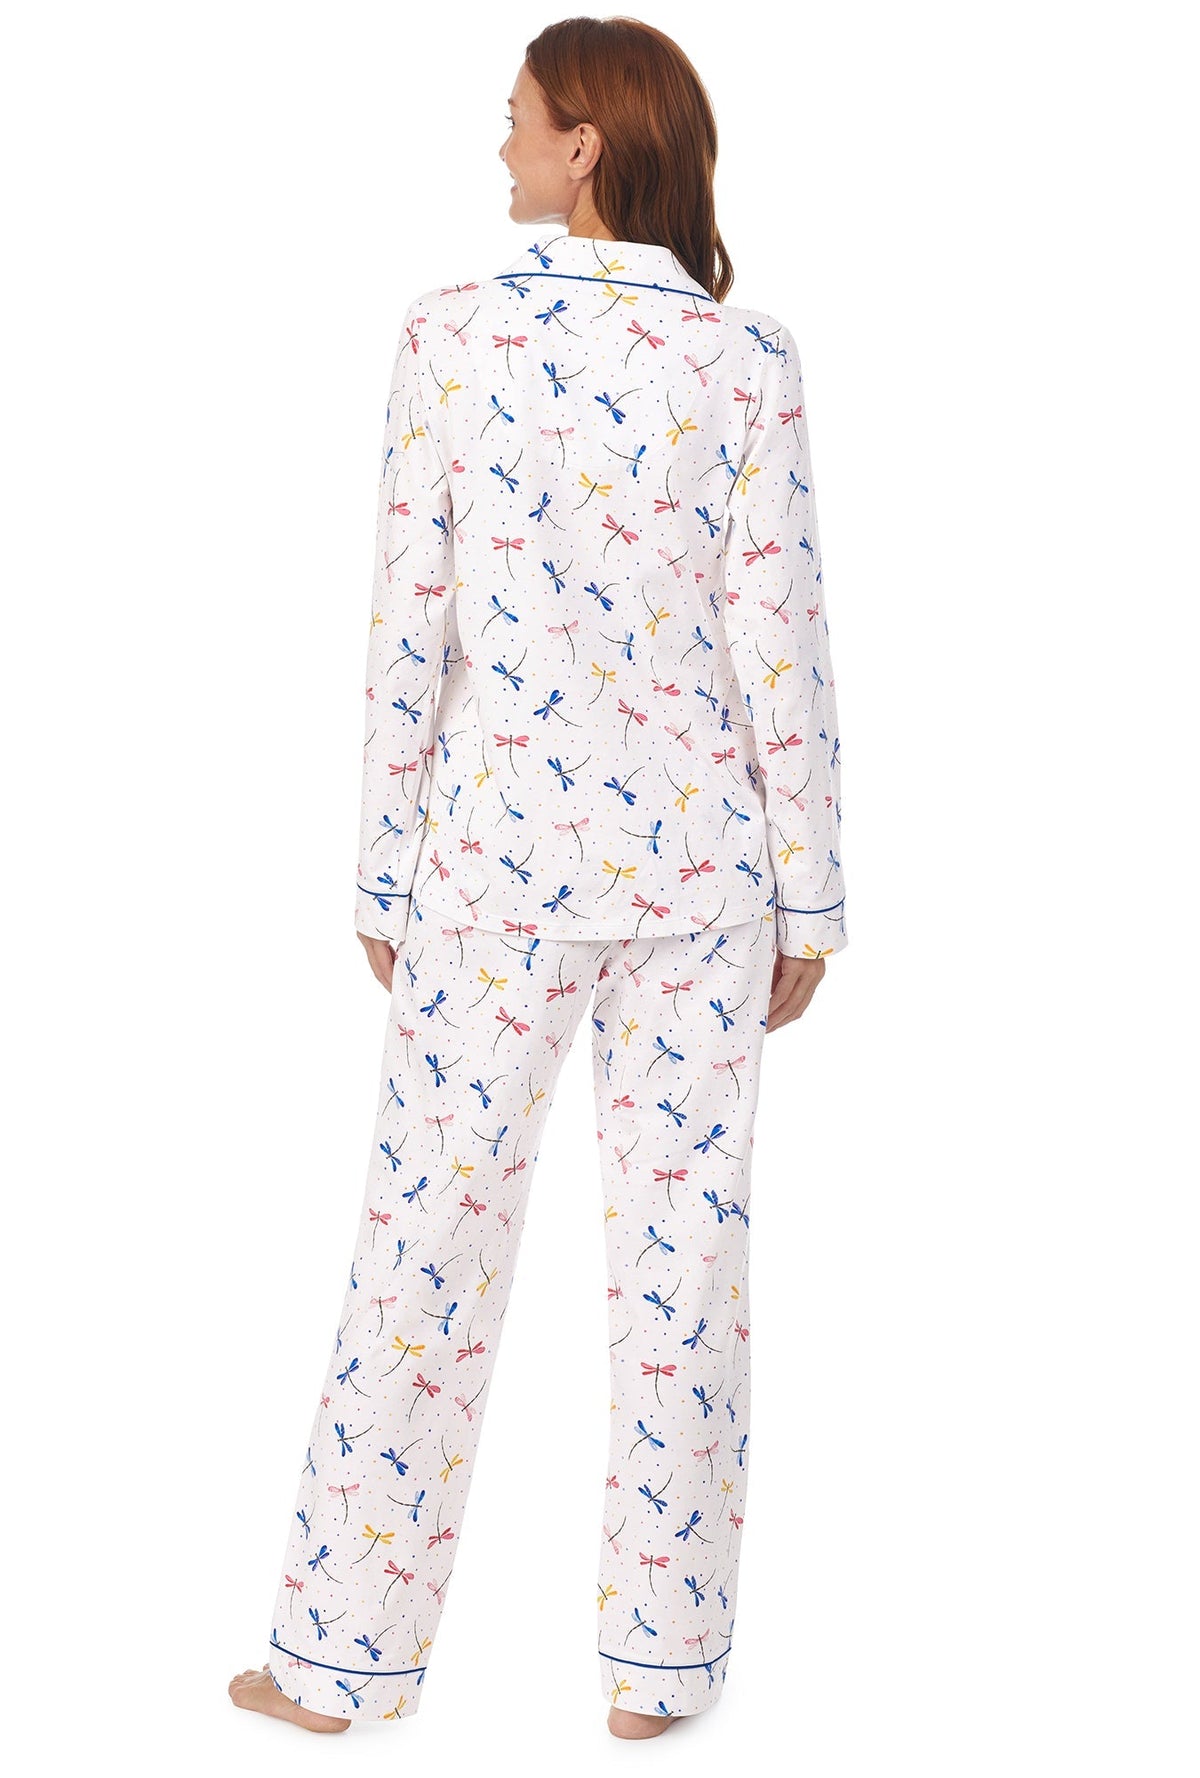 A lady wearing a white long sleeve pj set with dragonfly pattern.